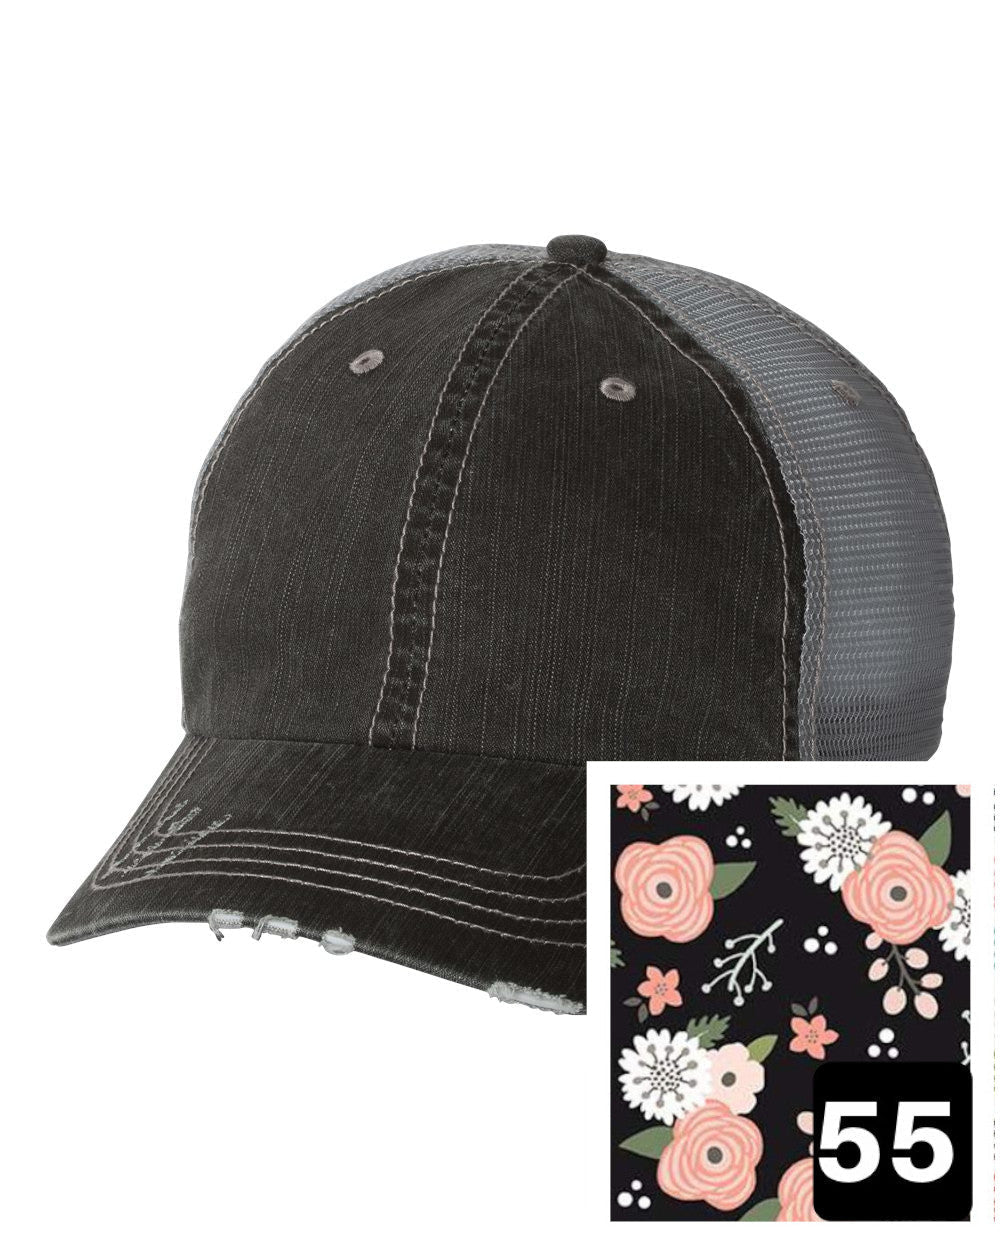 gray distressed trucker hat with petite floral on navy fabric state of Hawaii